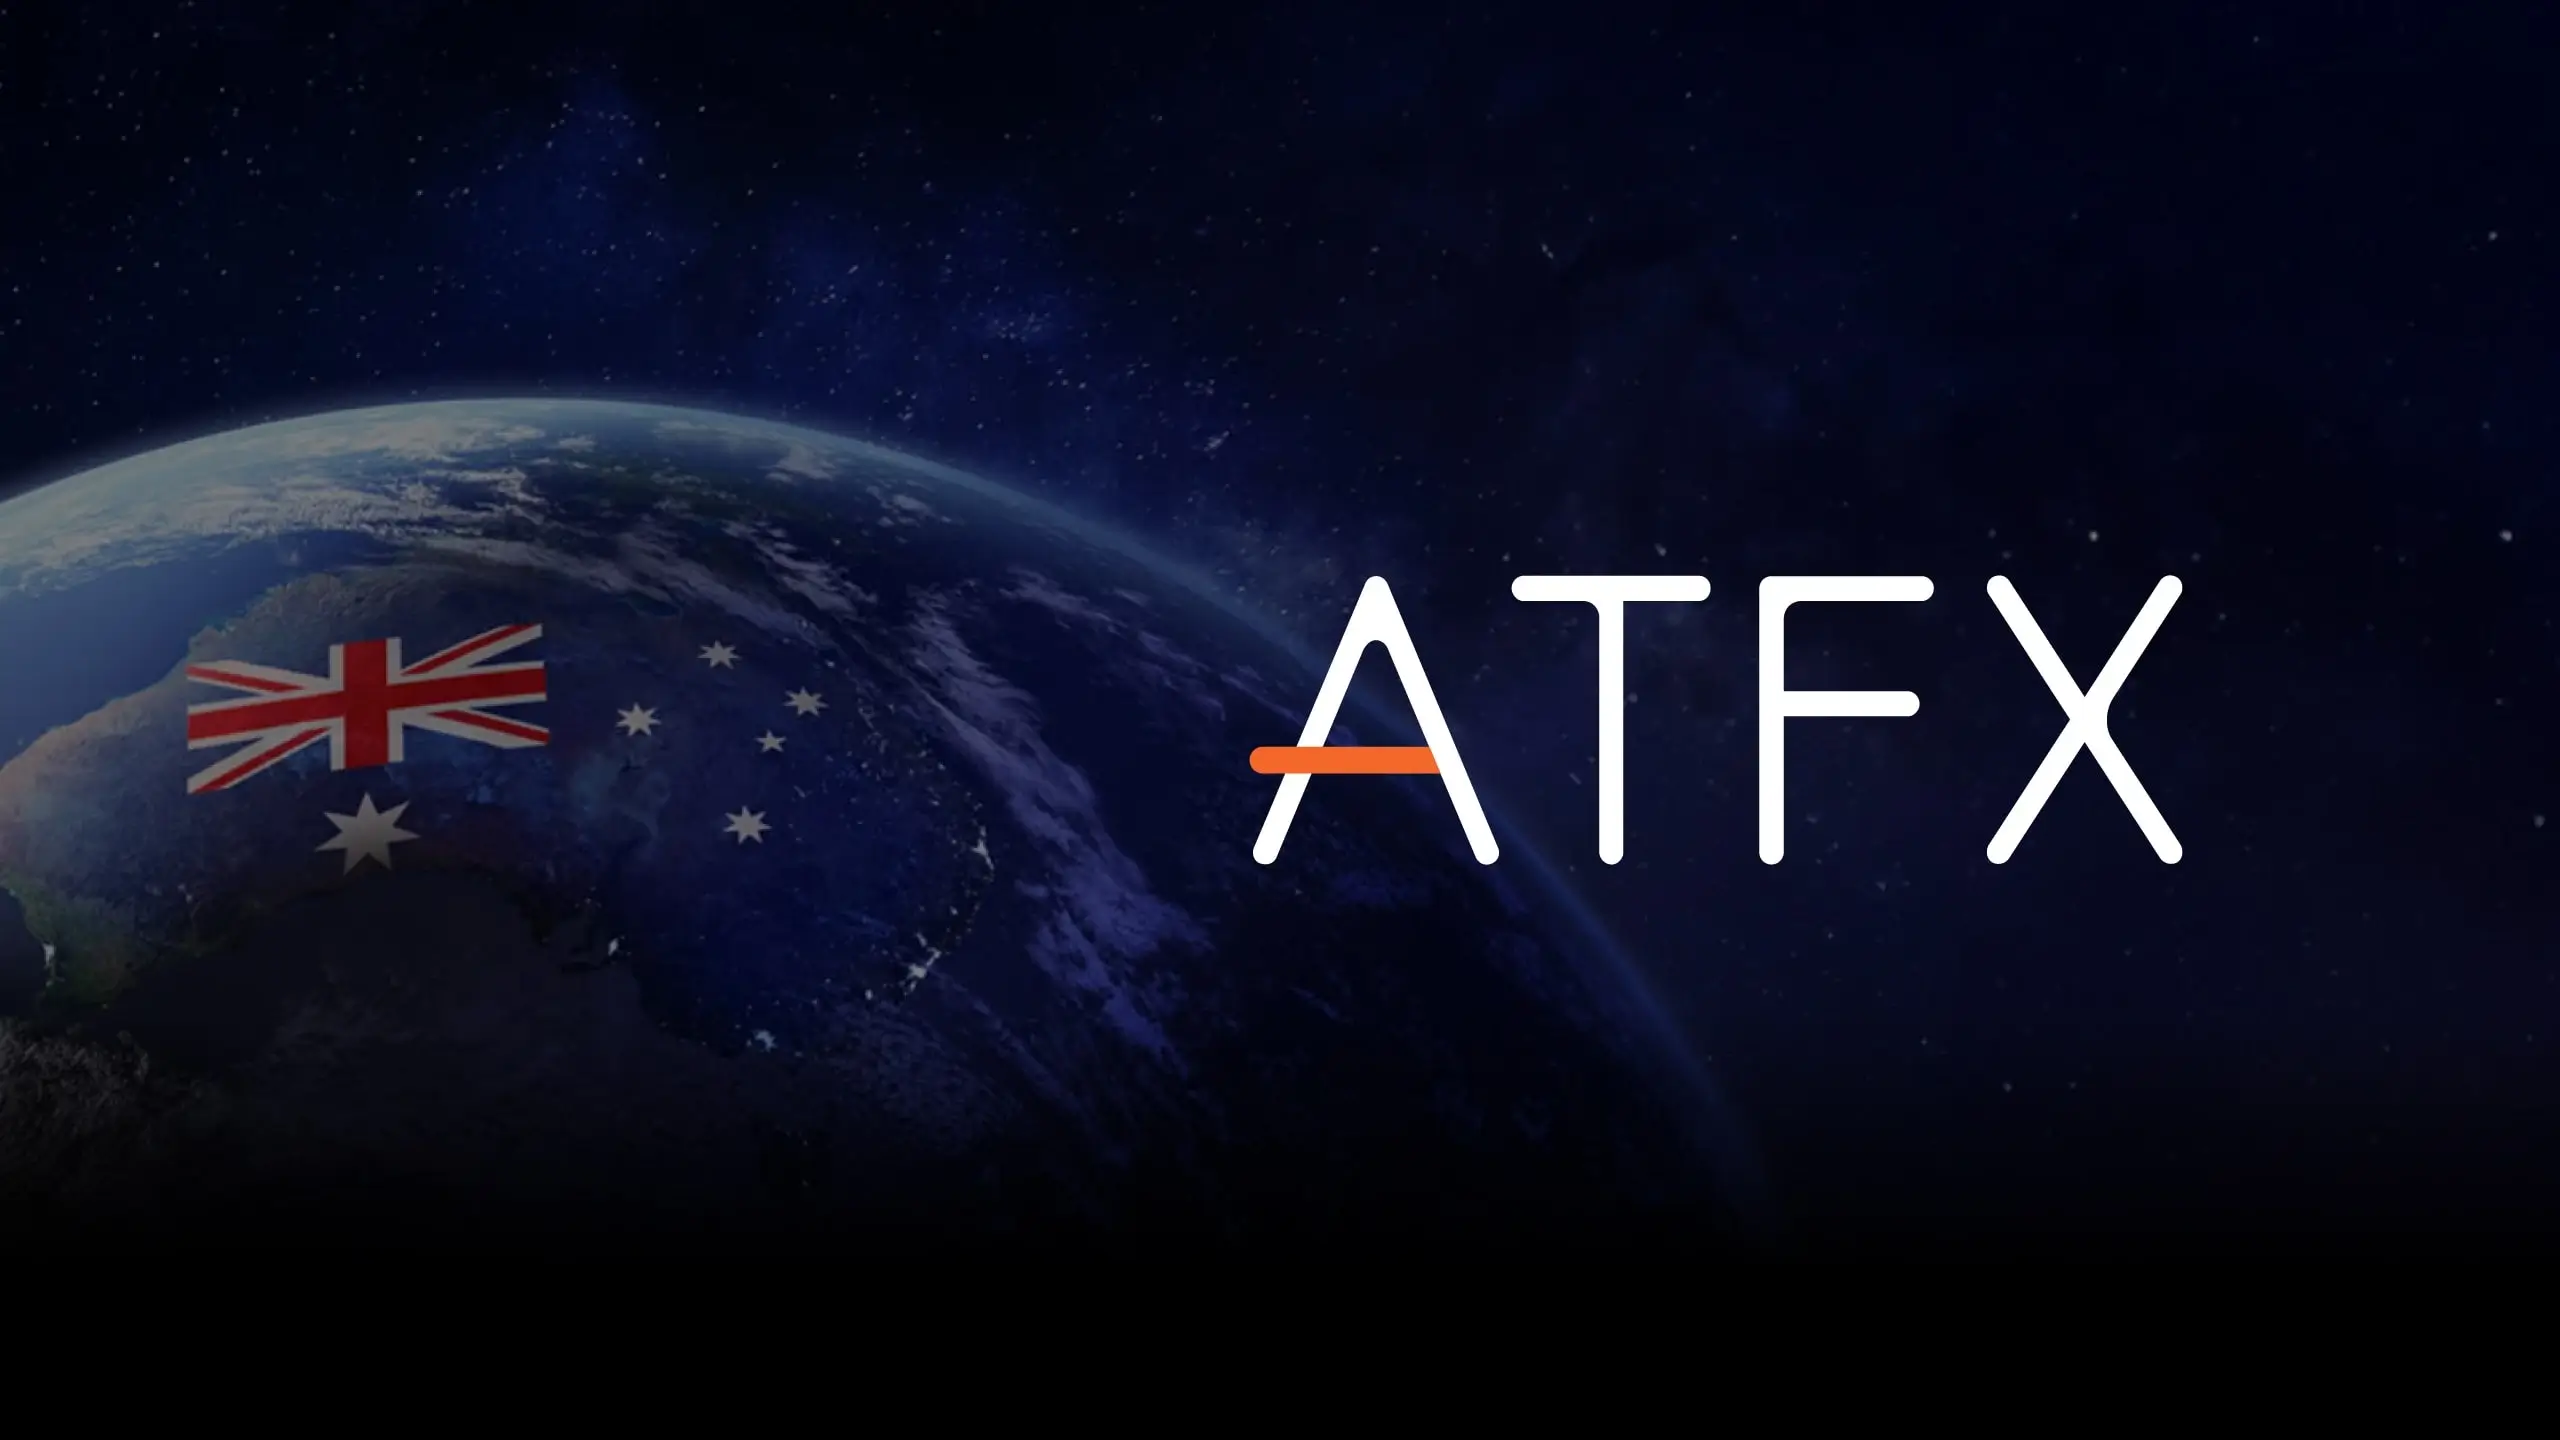 atfx-announced-the-change-of-name-of--securities-australia